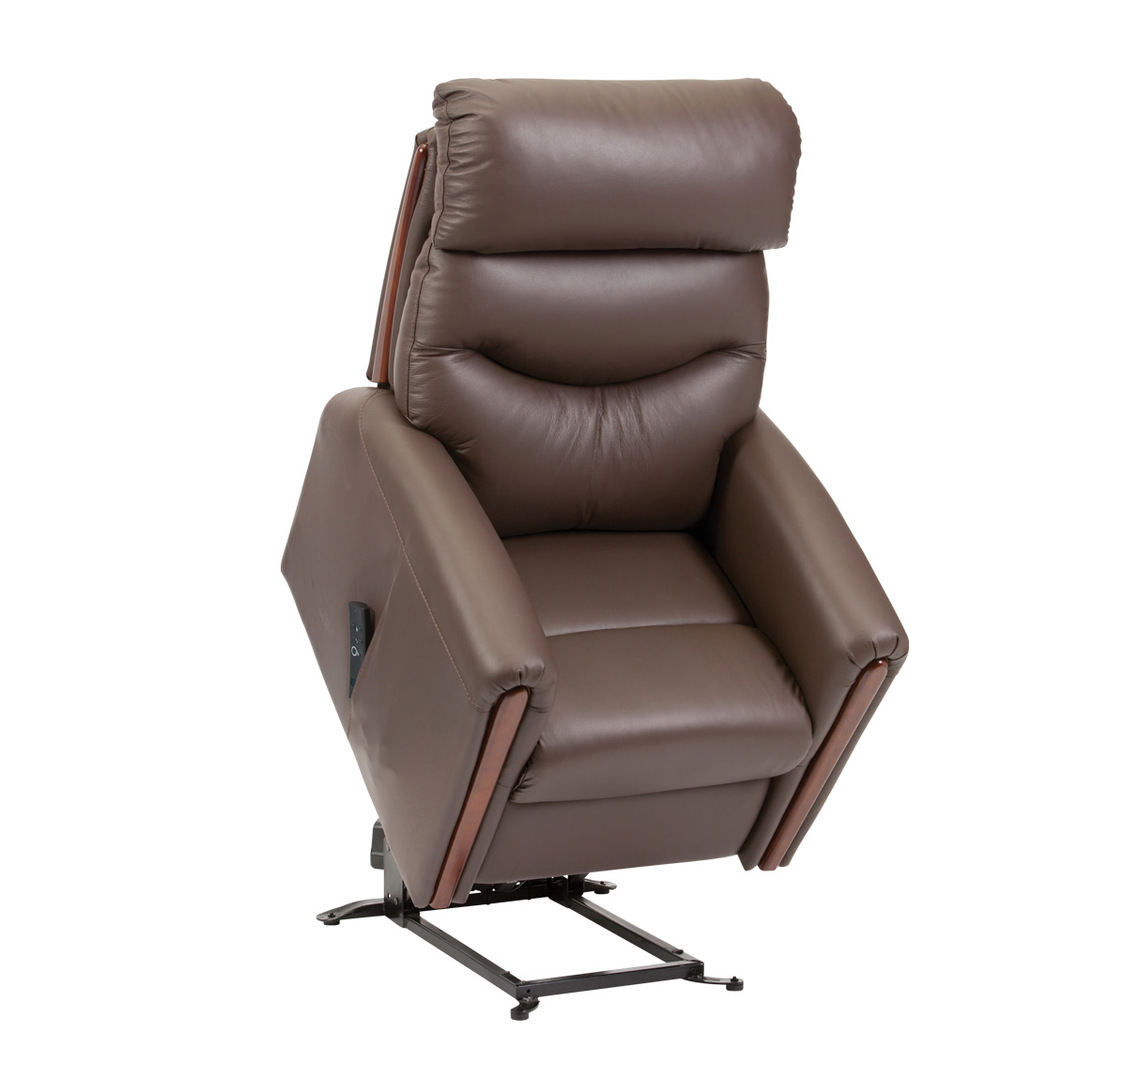 Rise Recliner - Restwell - Santana, Available in Fabric or Leather. FREE Delivery, On Sale.